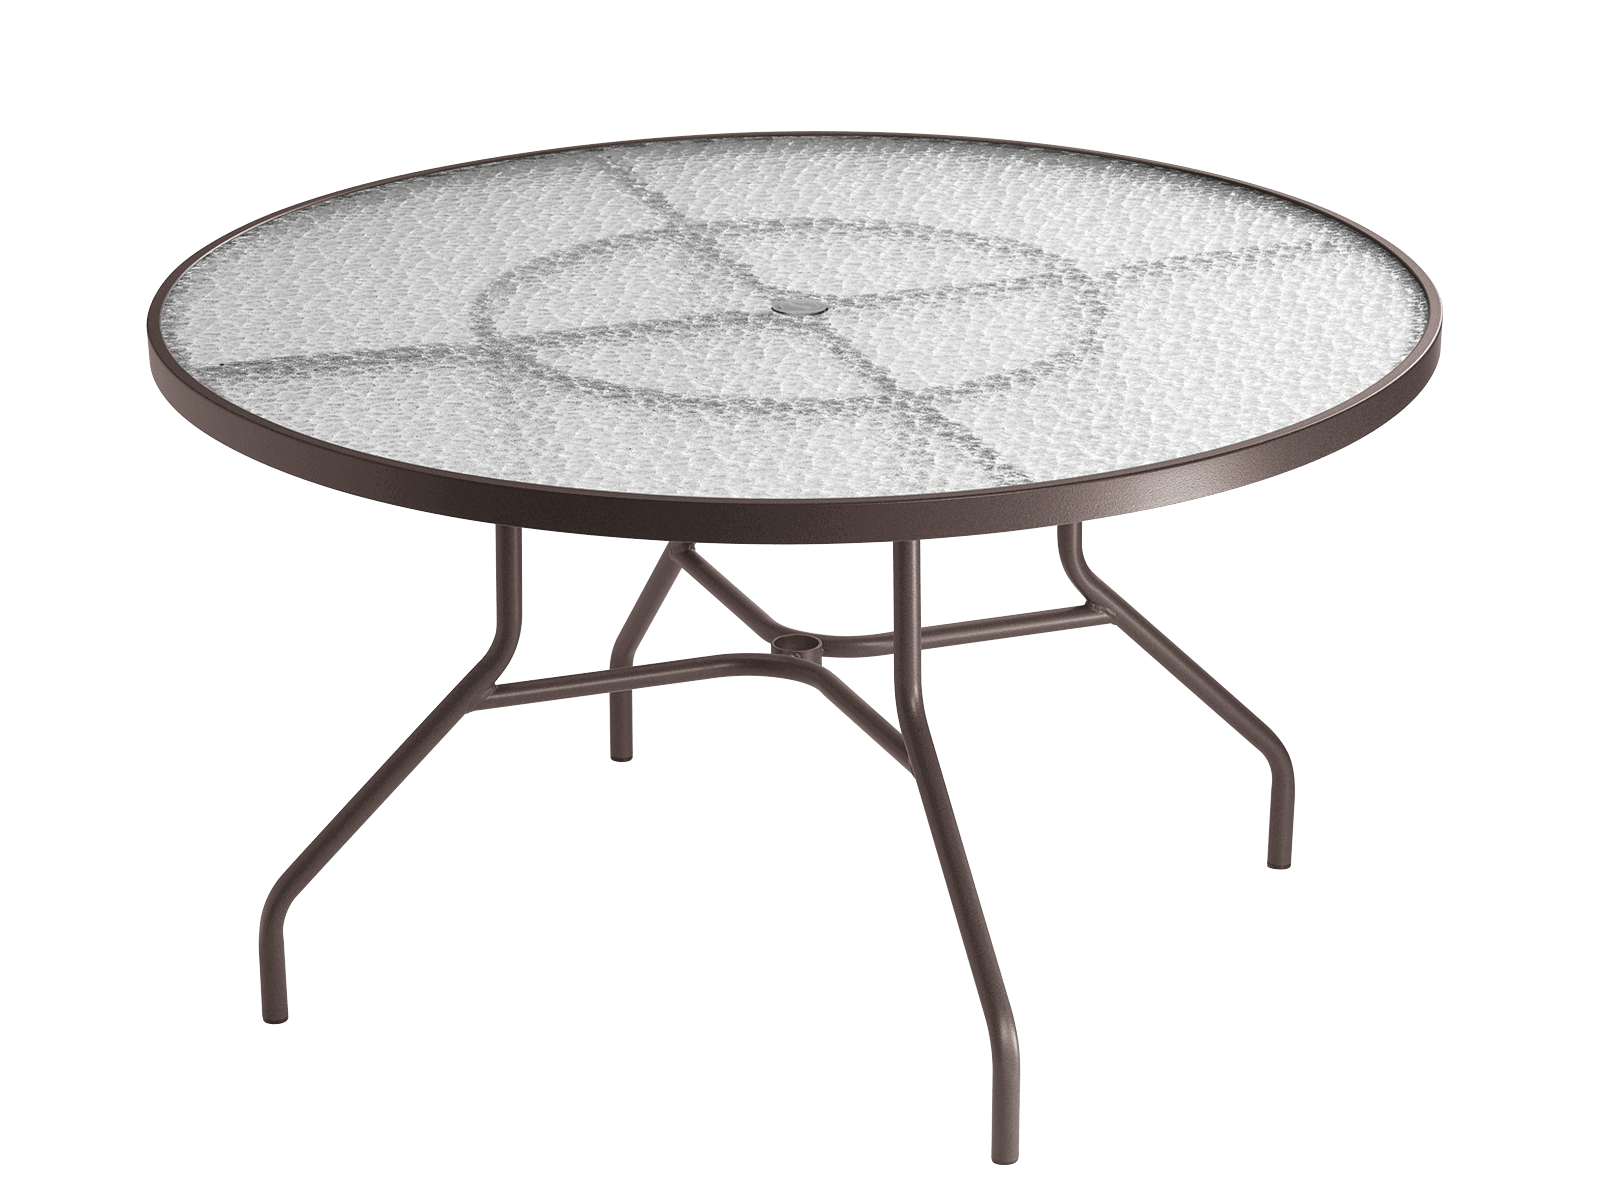 Huge Acrylic Round Dining Room Table